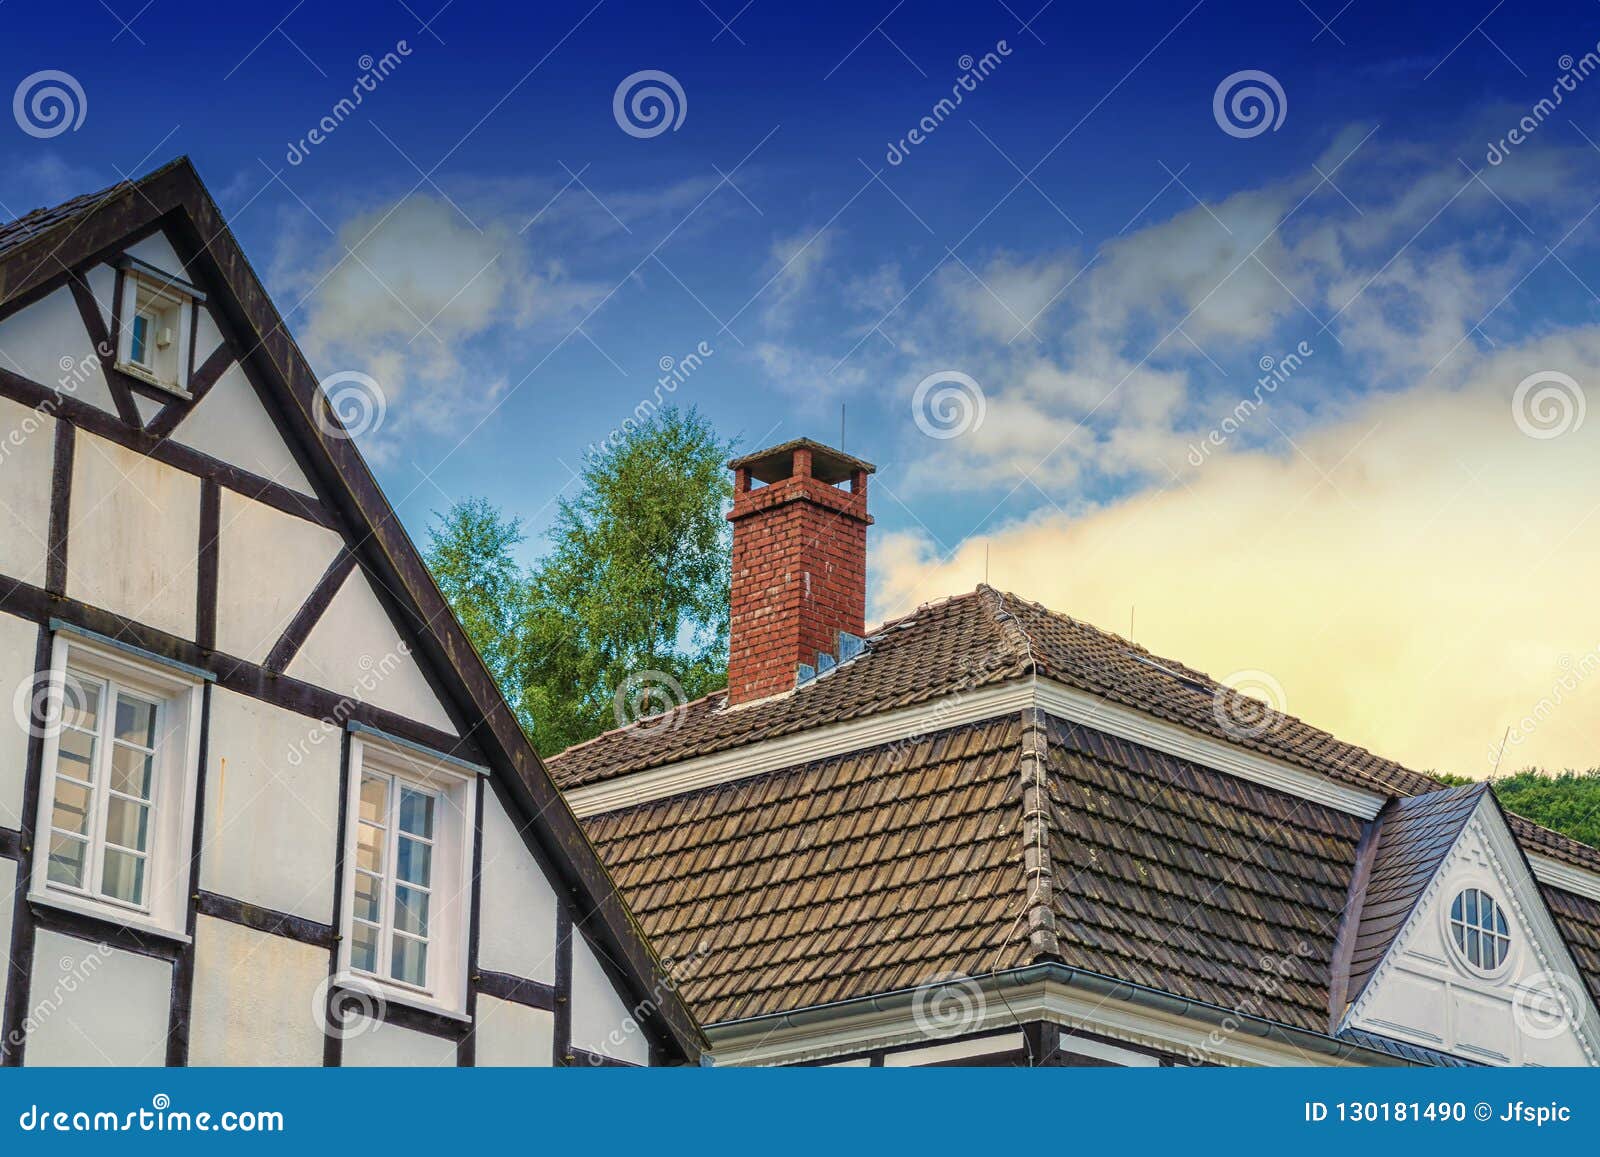 Old Roof Construction With Roof Skylights Stock Photo Image Of